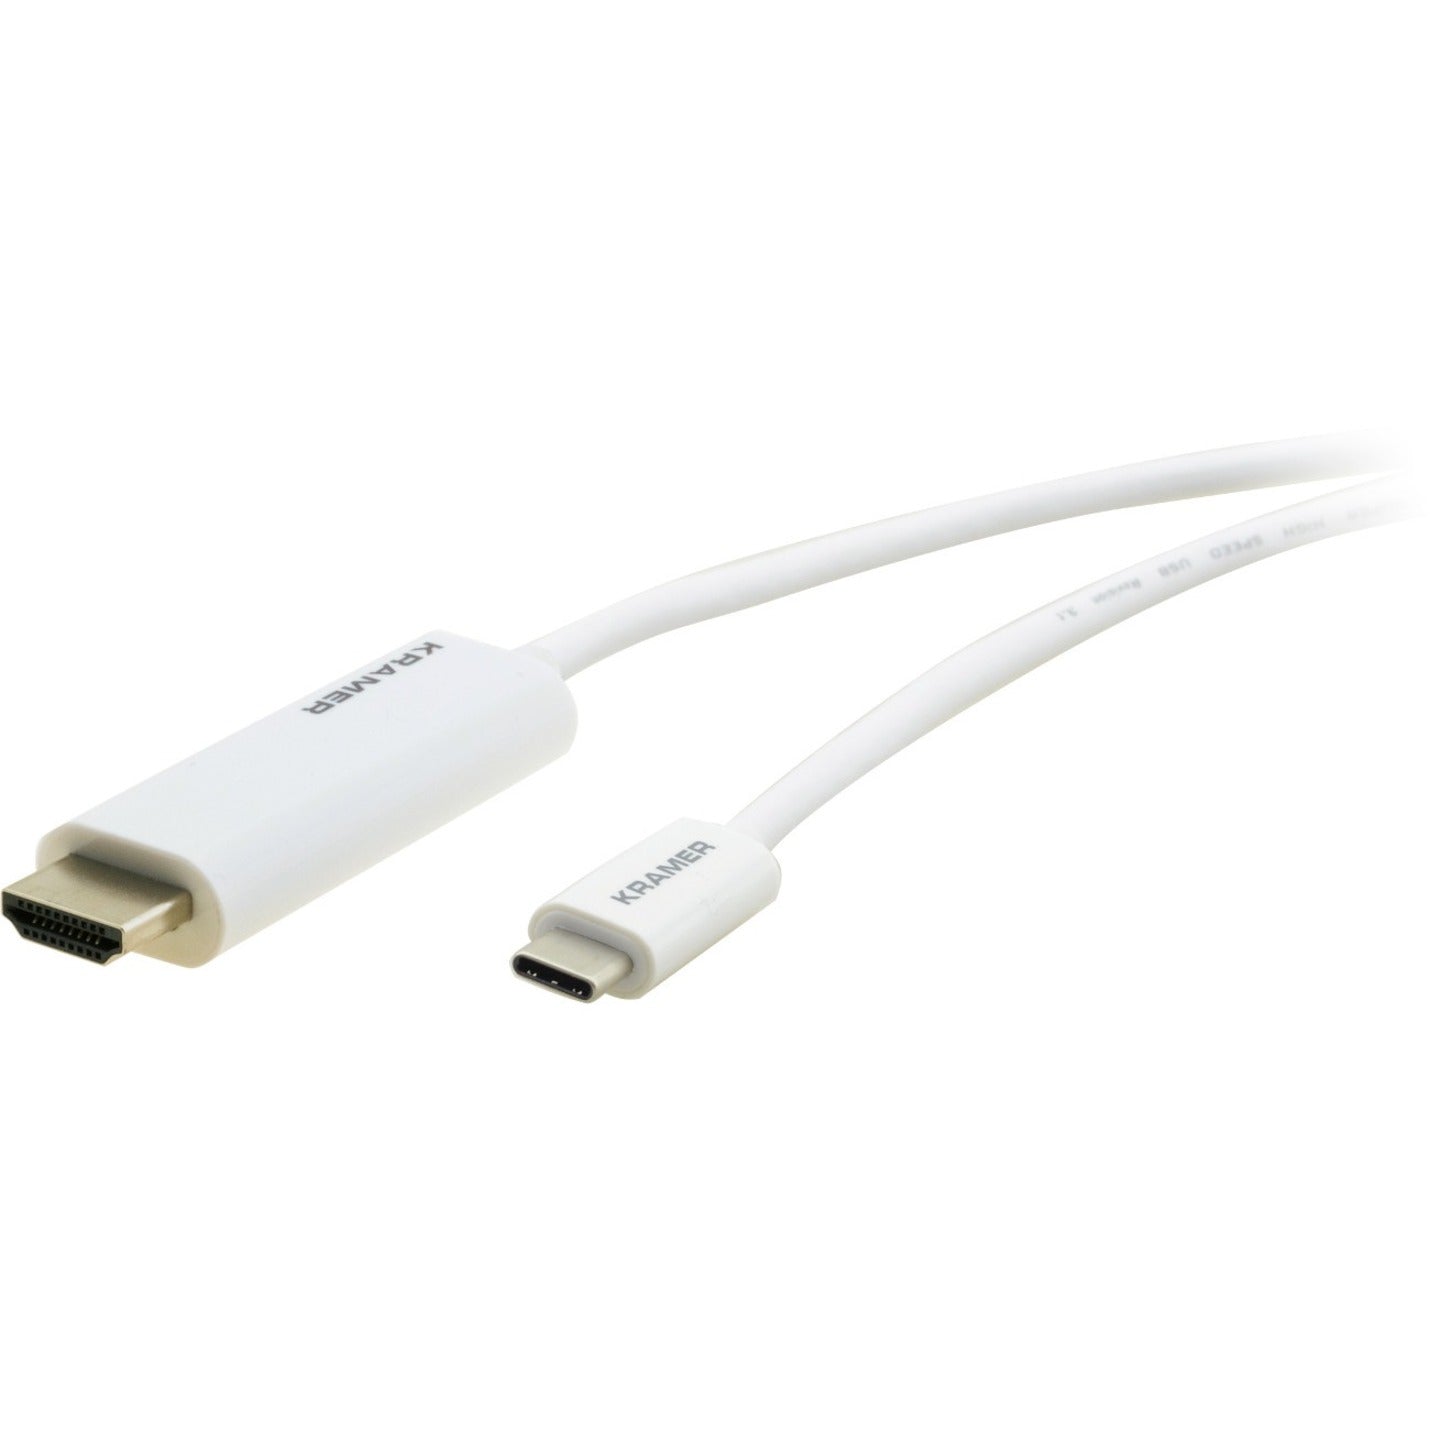 Kramer 99-97211106 USB Type-C (M) to HDMI (M) Cable, 6 ft, 4K Ultra HD Video and Audio Transmission